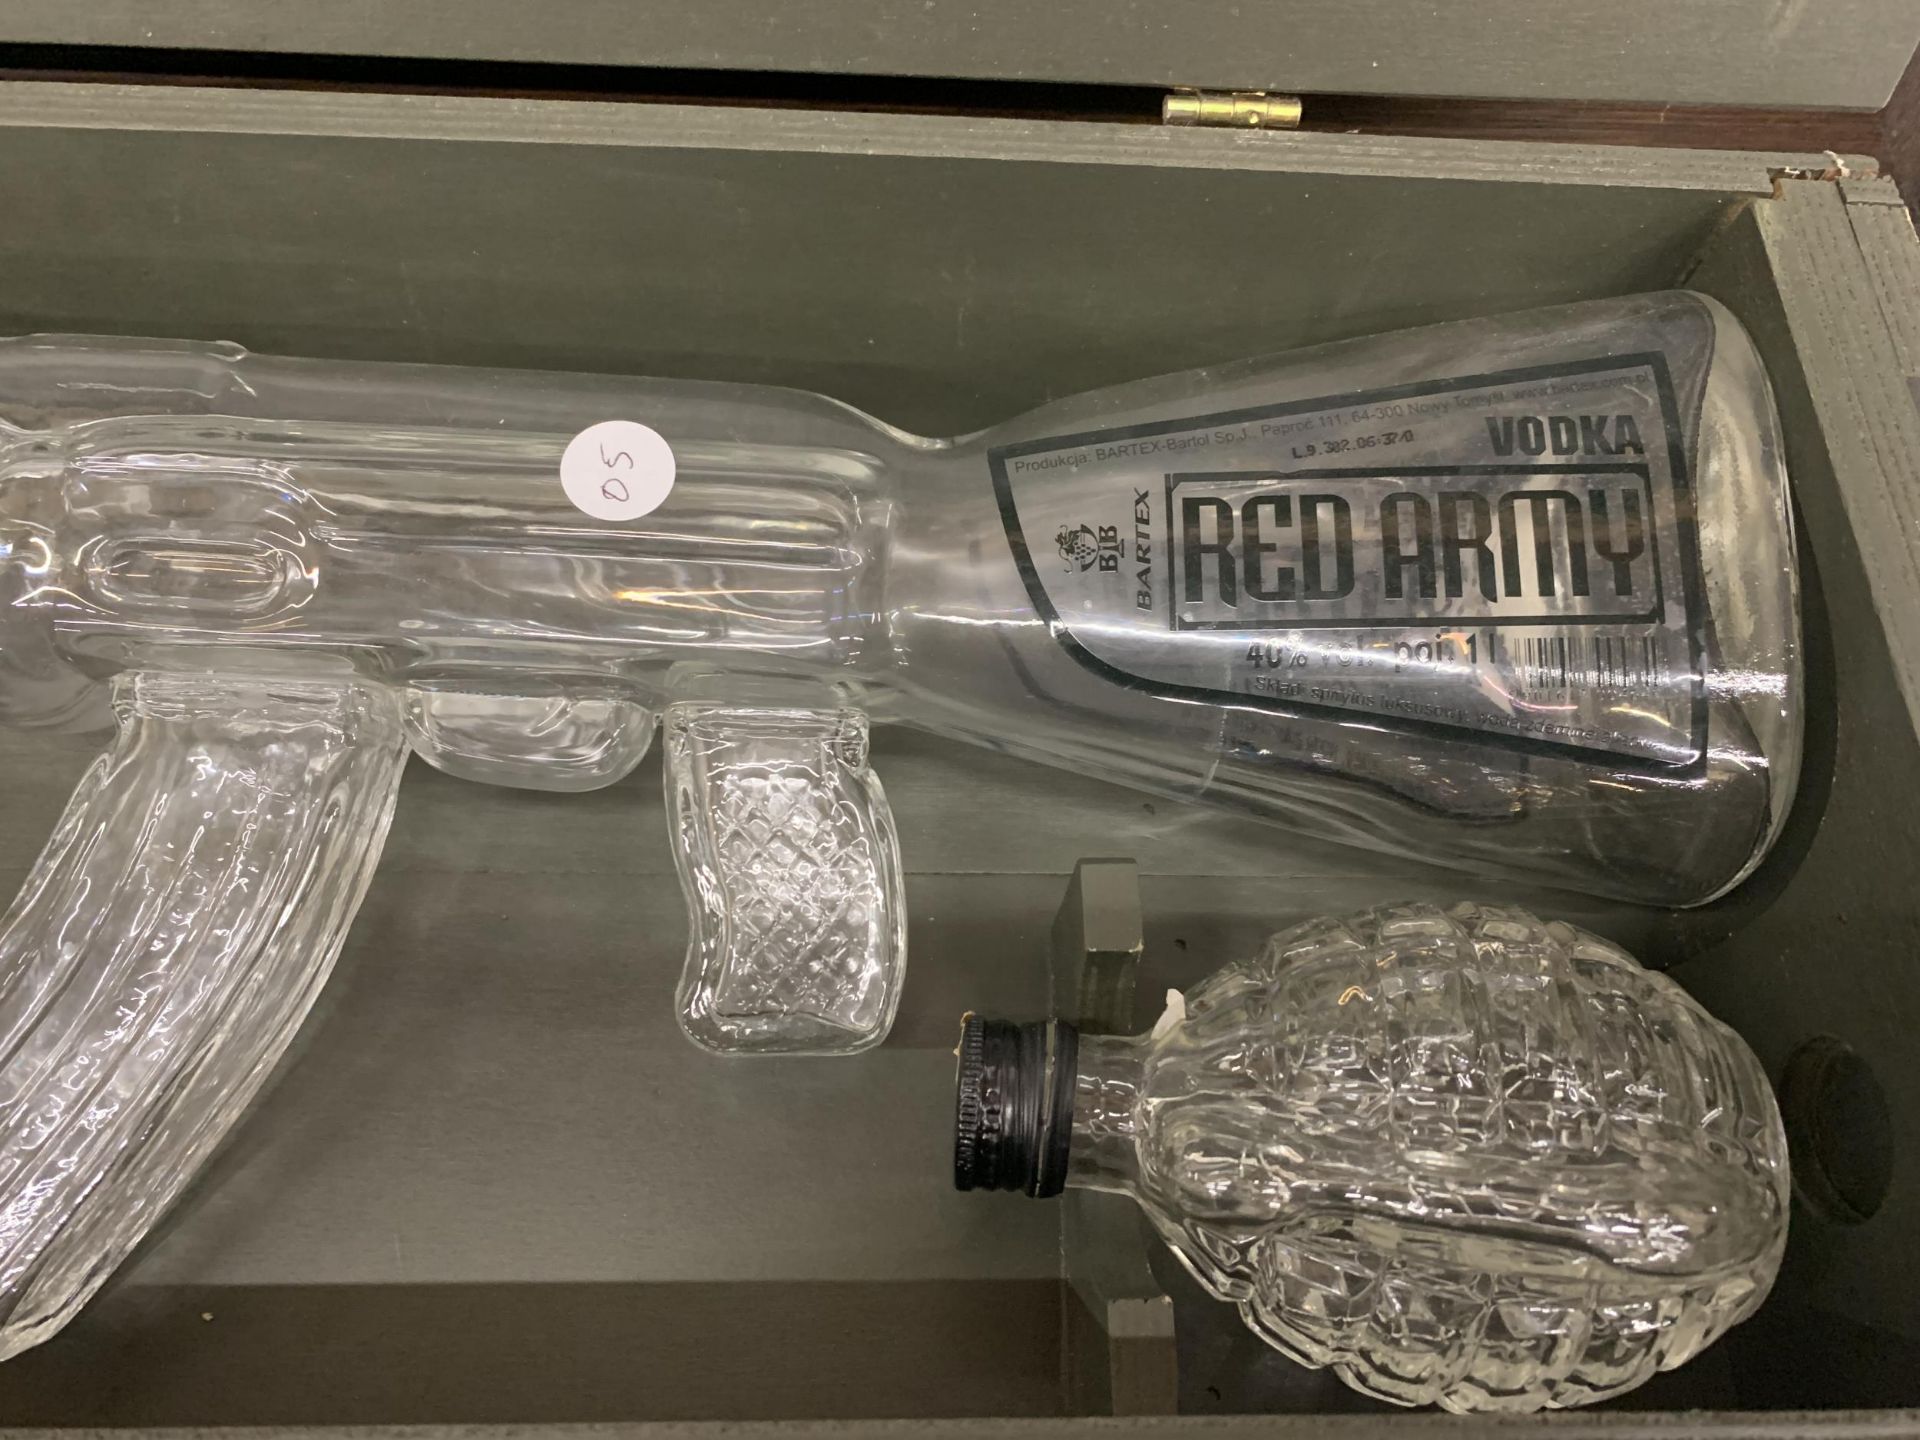 A BOXED RED ARMY GLASS GUN SPIRITS BOTTLE, SIX GLASSES AND GRENADE HIP FLASK - Image 3 of 3